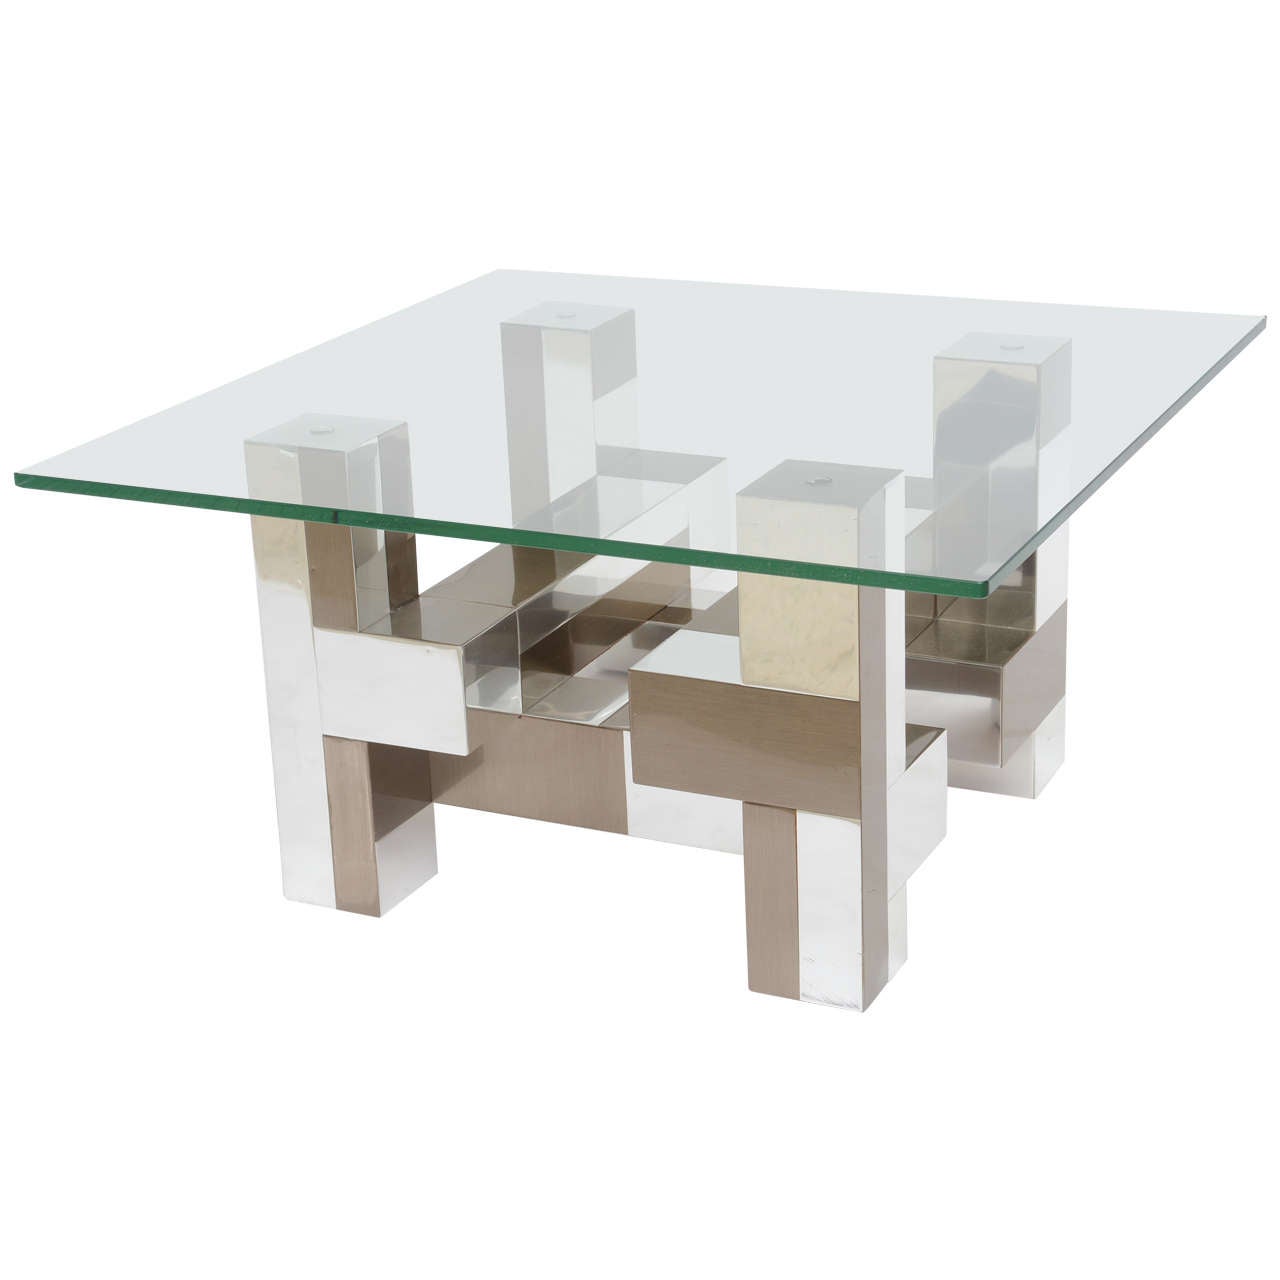 American Modern Chrome and Pewter Cityscape Low Table, Paul Evans